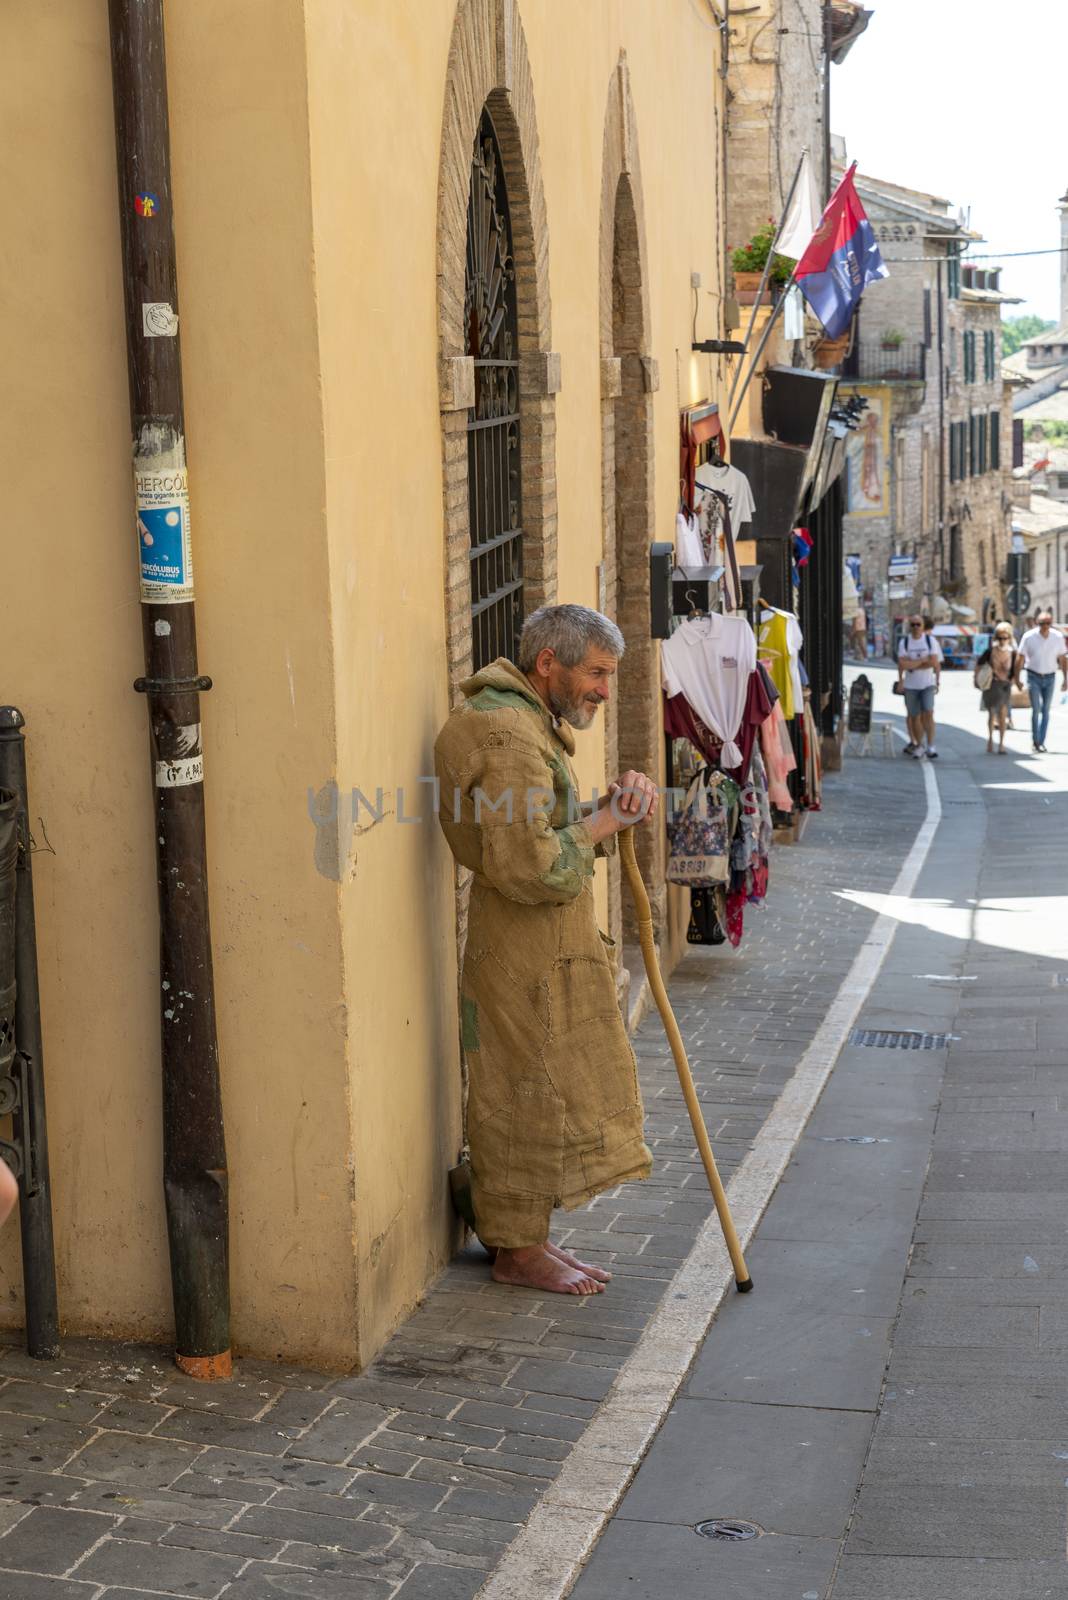 assisi,italy july 11 2020:barefoot hermit asking for alms in a street of assisi